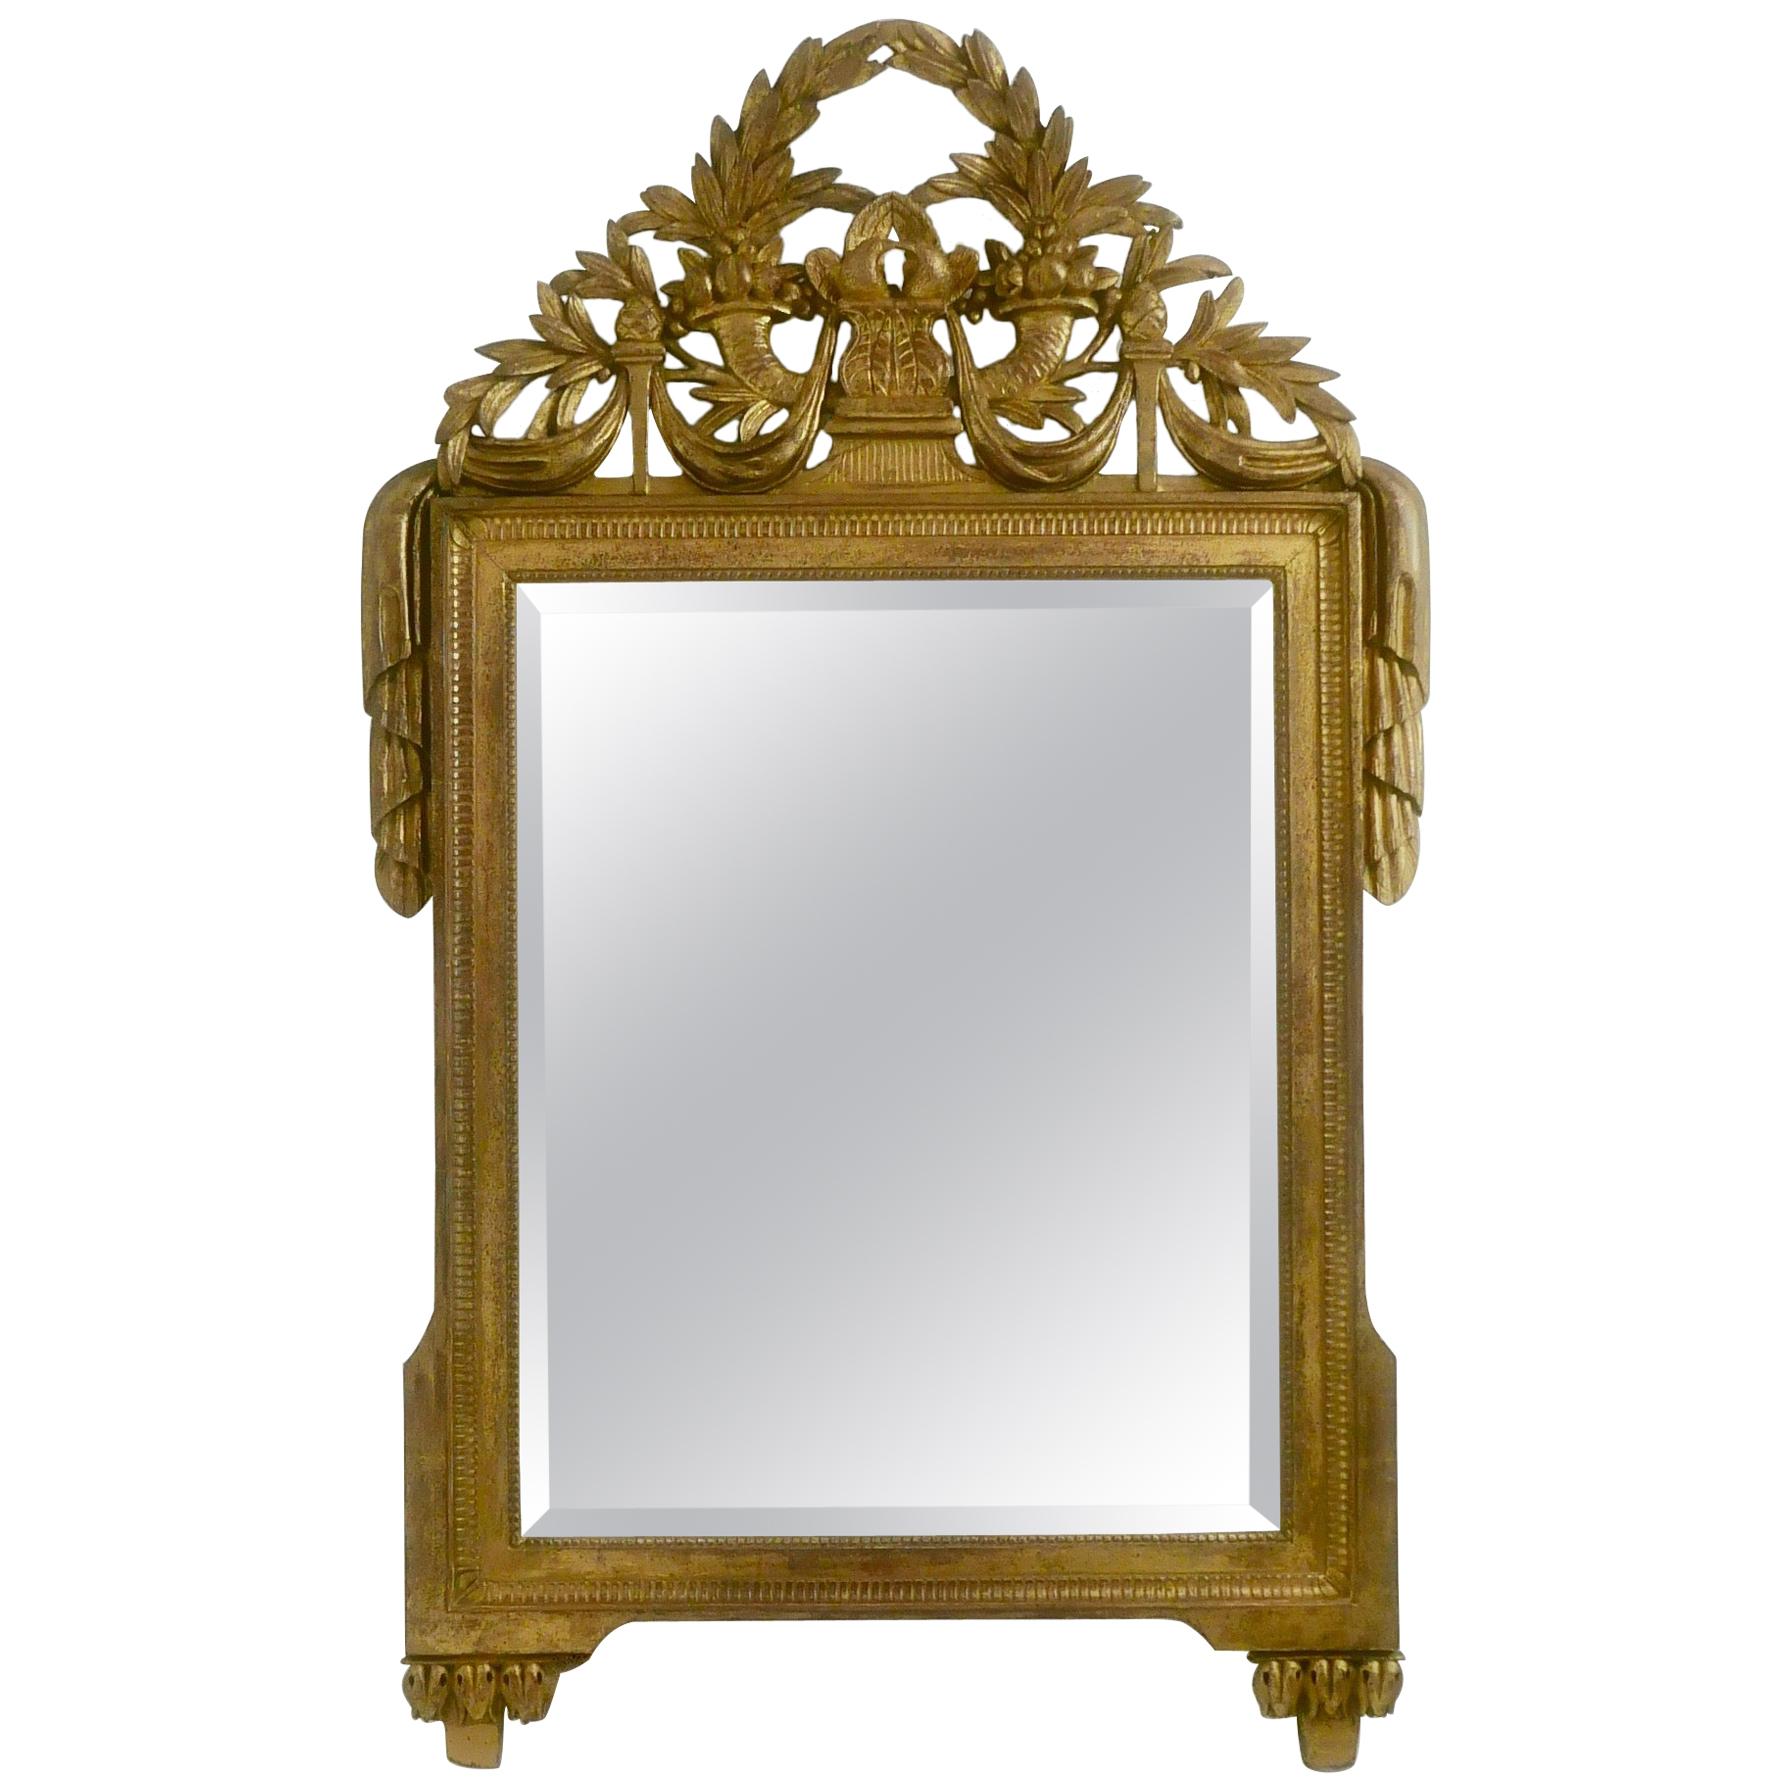 Louis XVI Period Carved and Gilded Wood Framed Beveled Mirror